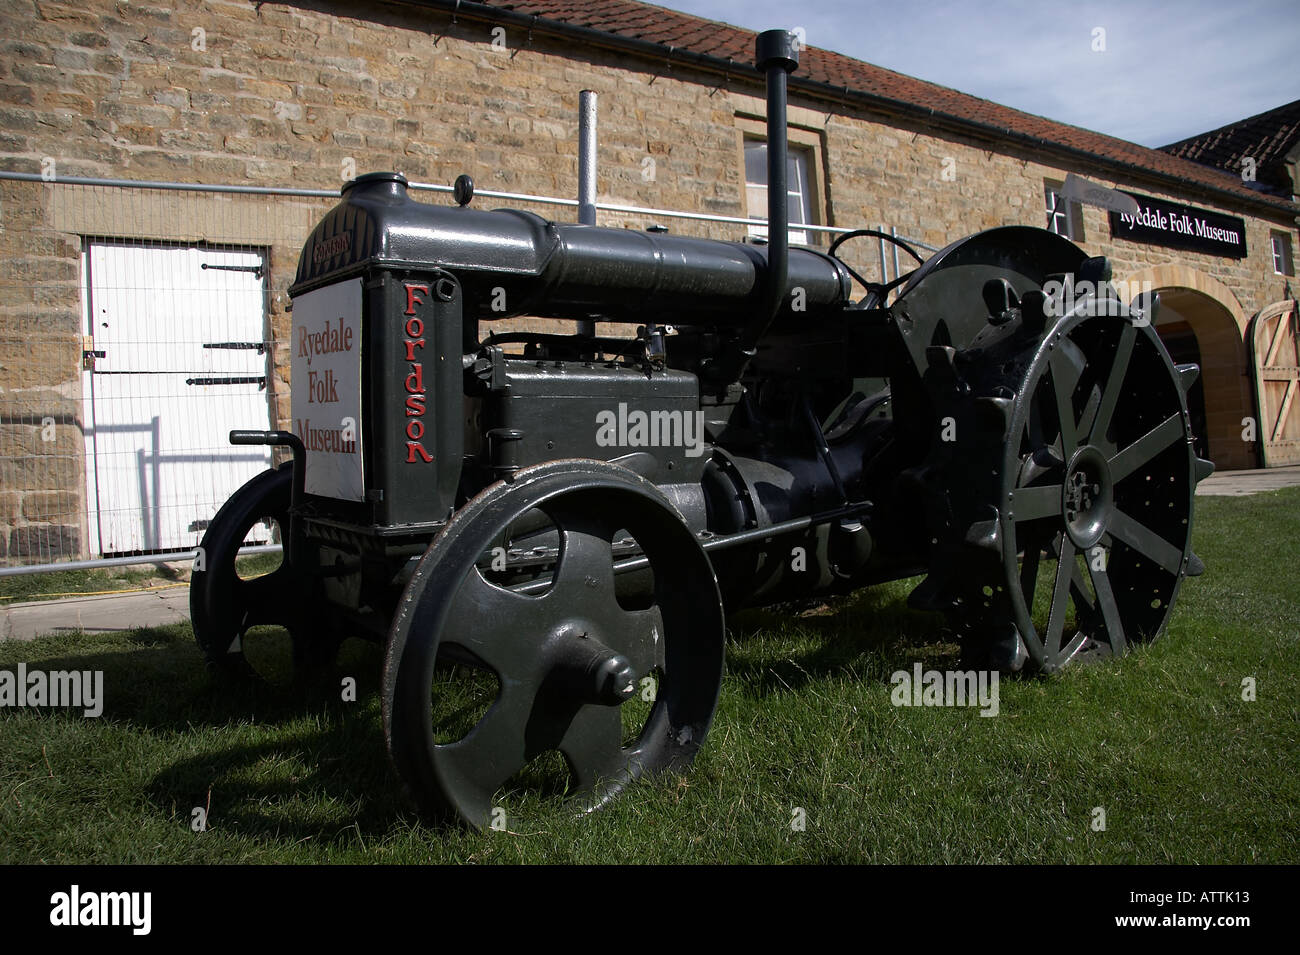 Fordson tractor at the Ryedale Folk Museum Stock Photo